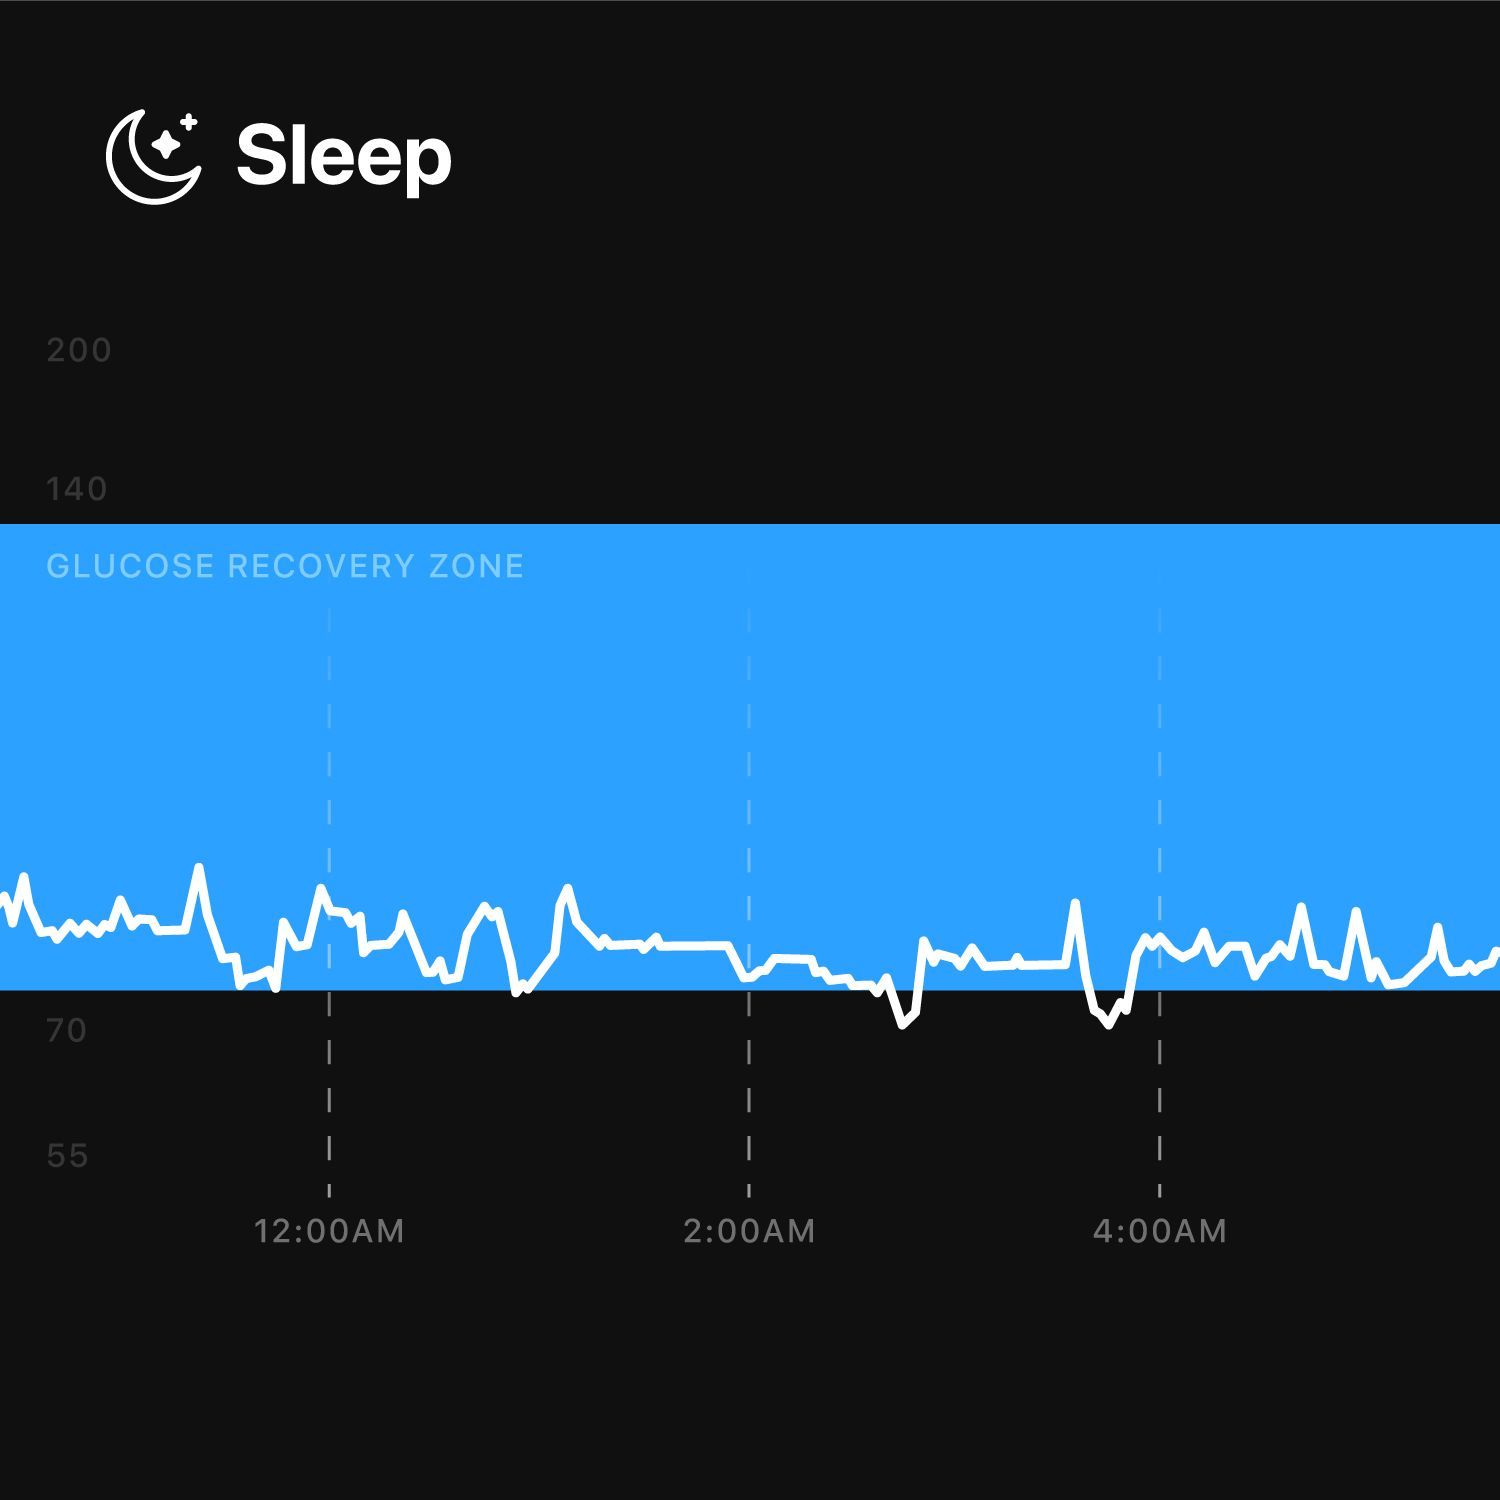 Sleep Data: What Does ‘Normal’ Look Like for a Supersapien?